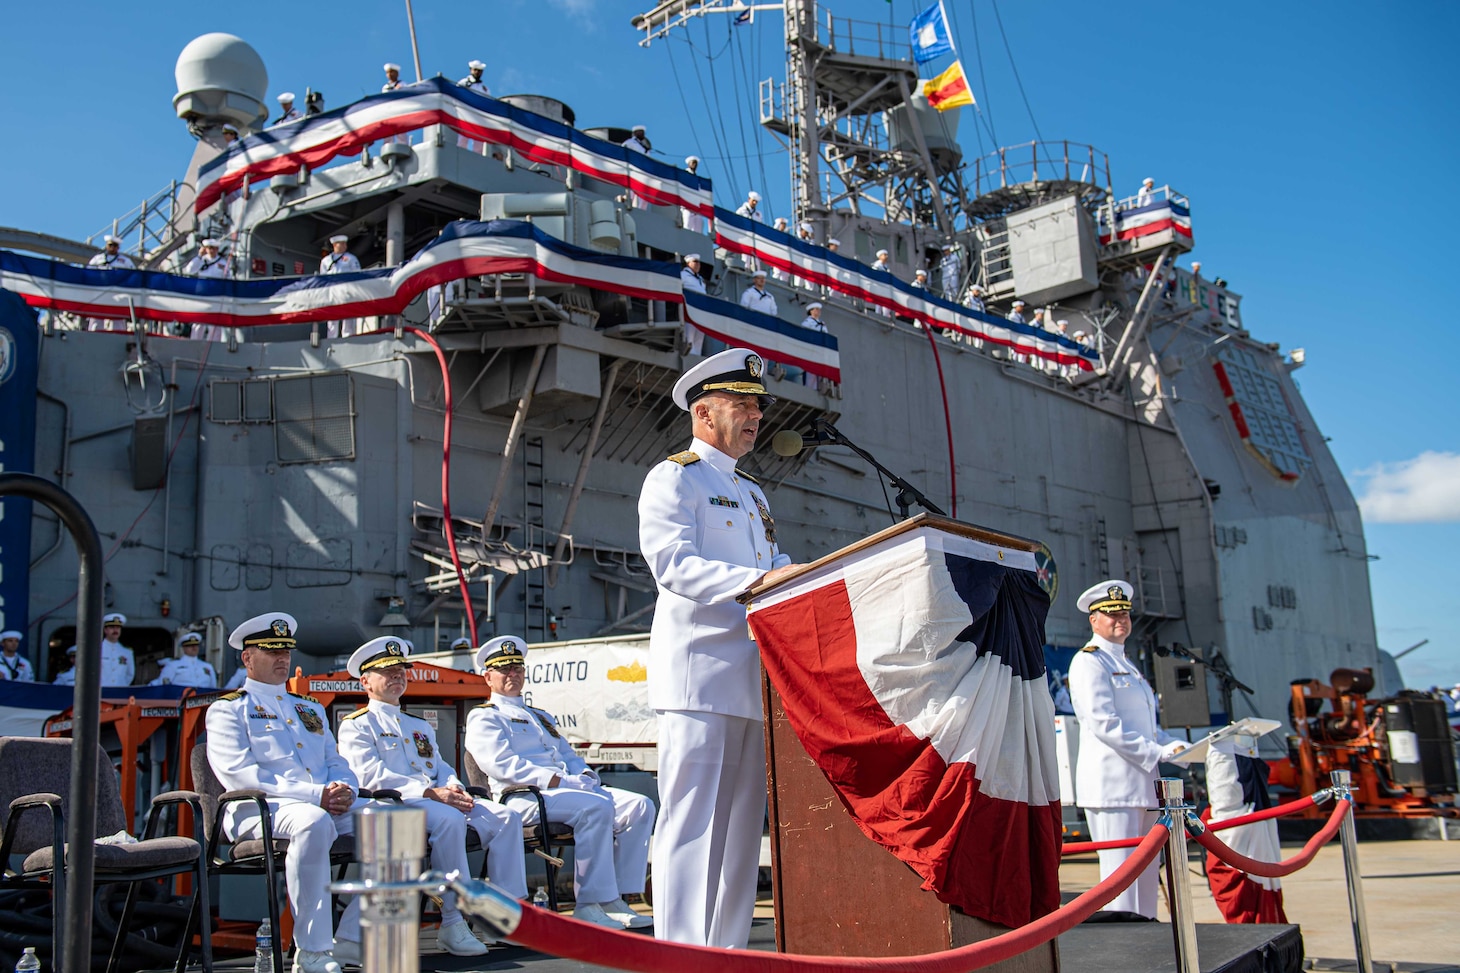 NORFOLK, Virginia (Sept. 25, 2023) - Vice Adm. Jim Kilby, commander, Task Force 80 and deputy commander, U.S. Fleet Forces, gives the keynote address during the decommissioning ceremony of USS San Jacinto (CG 56).